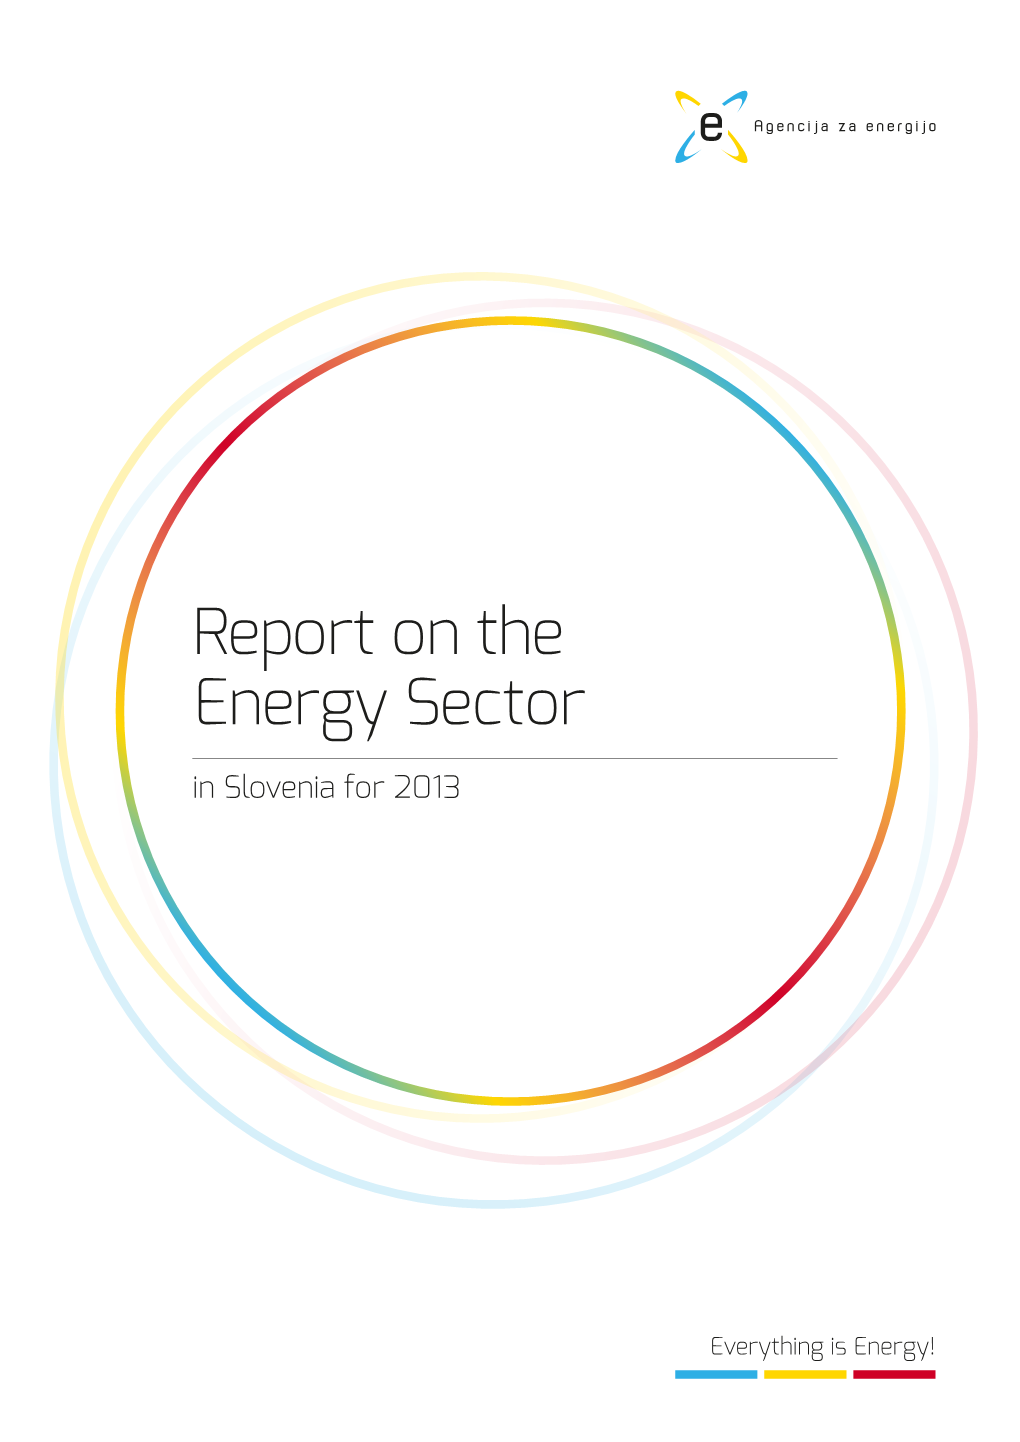 Report on the Energy Sector in Slovenia for 2013